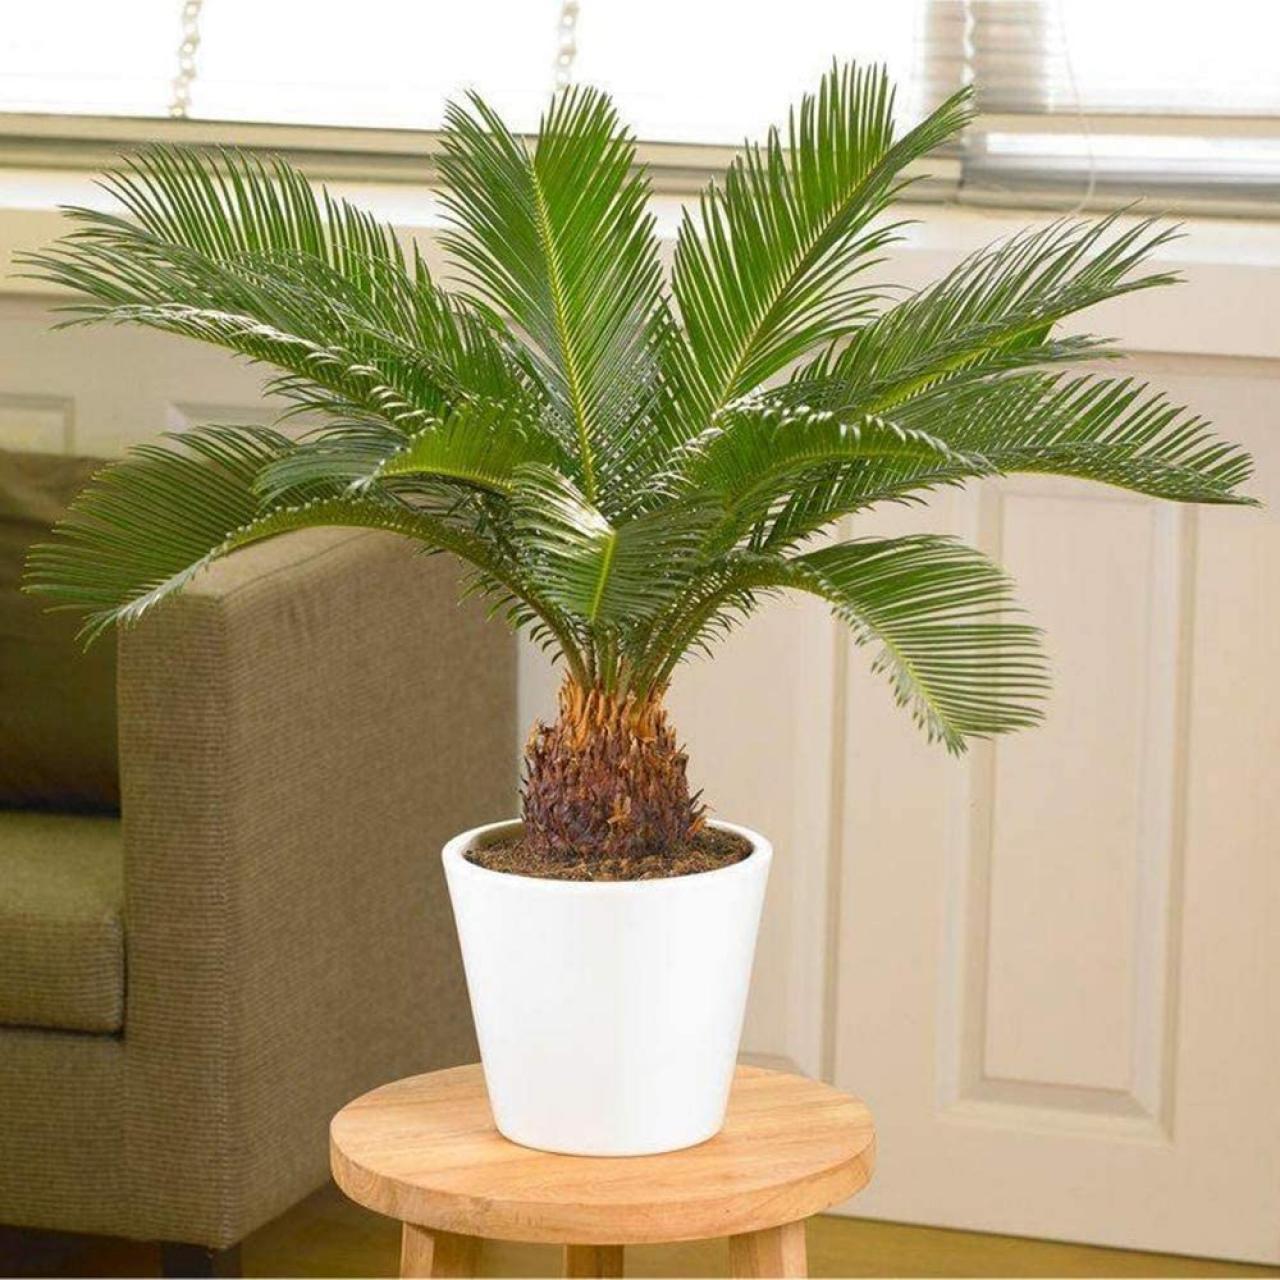 Potted palm plant